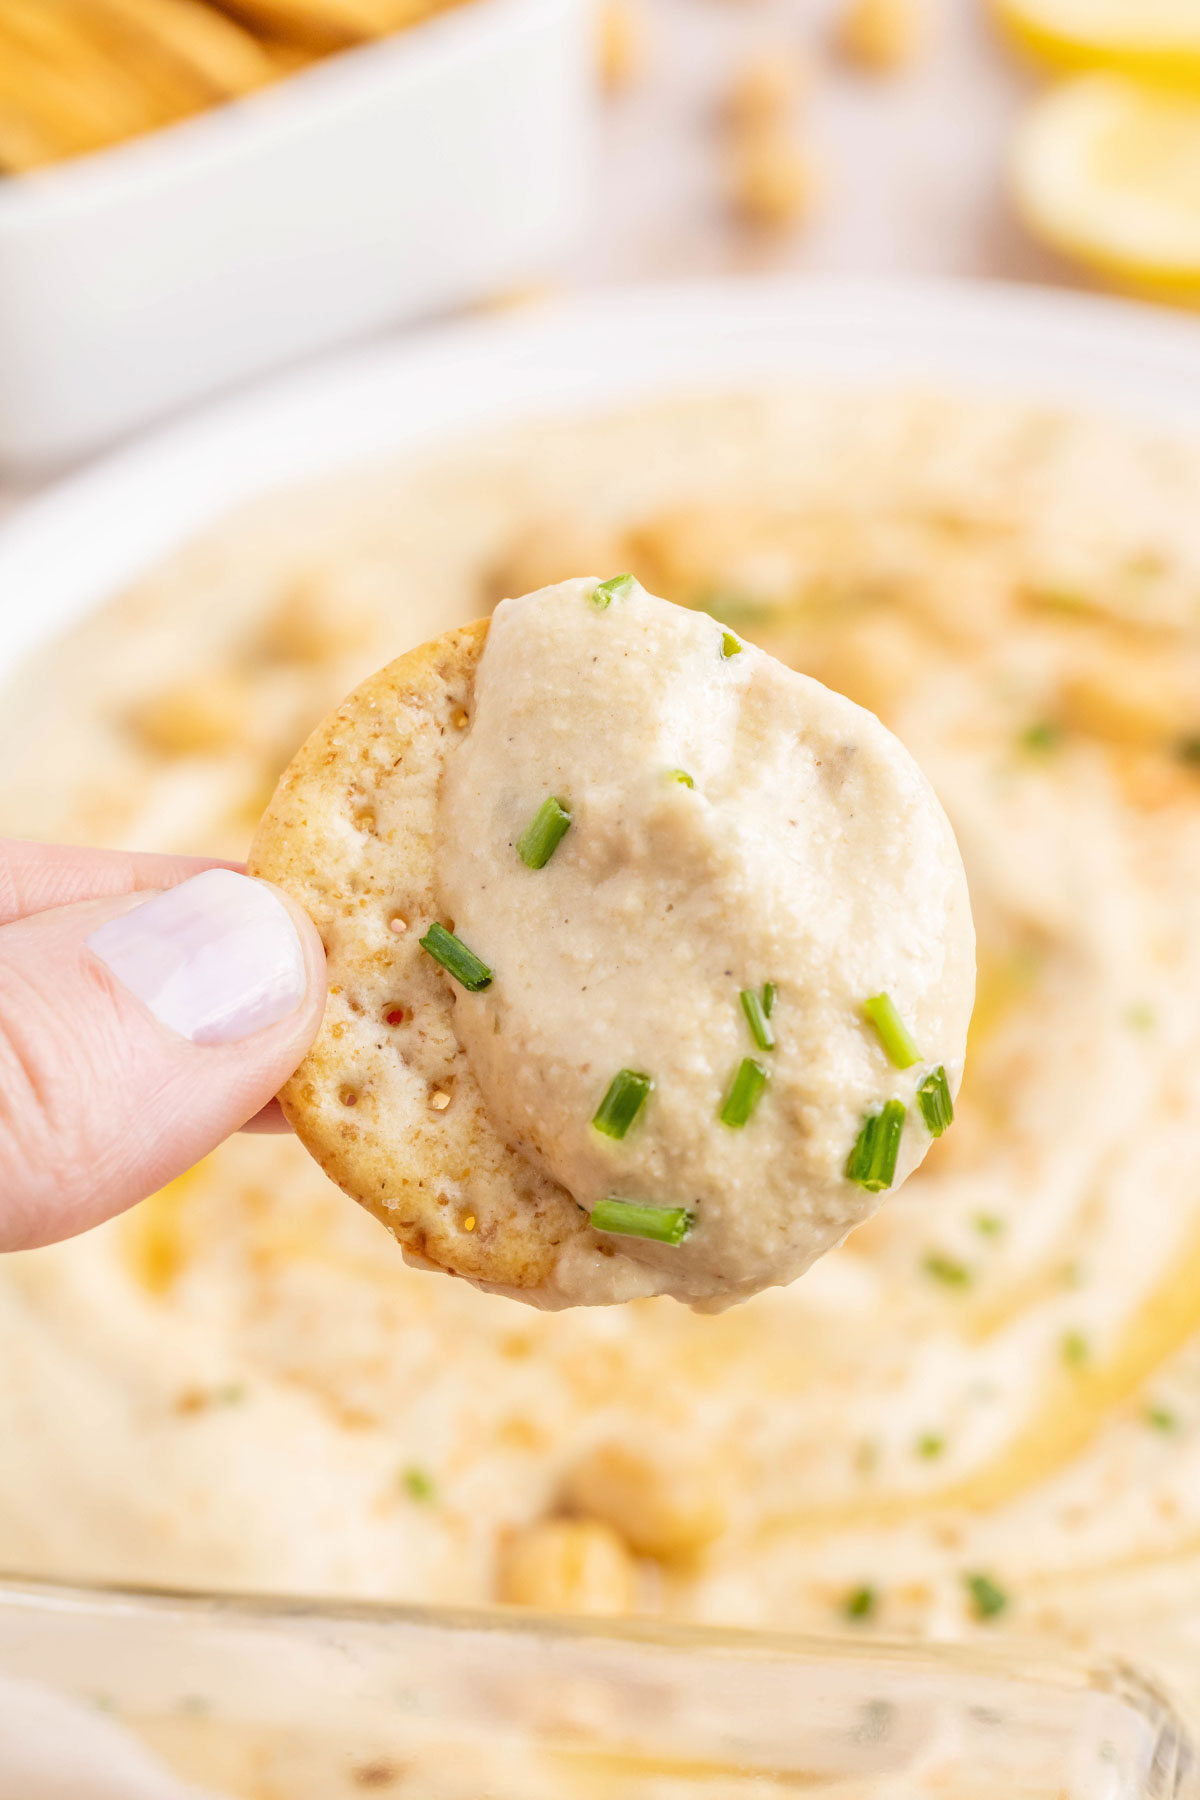 A cracker with a scoop of creamy garlic hummus on it.